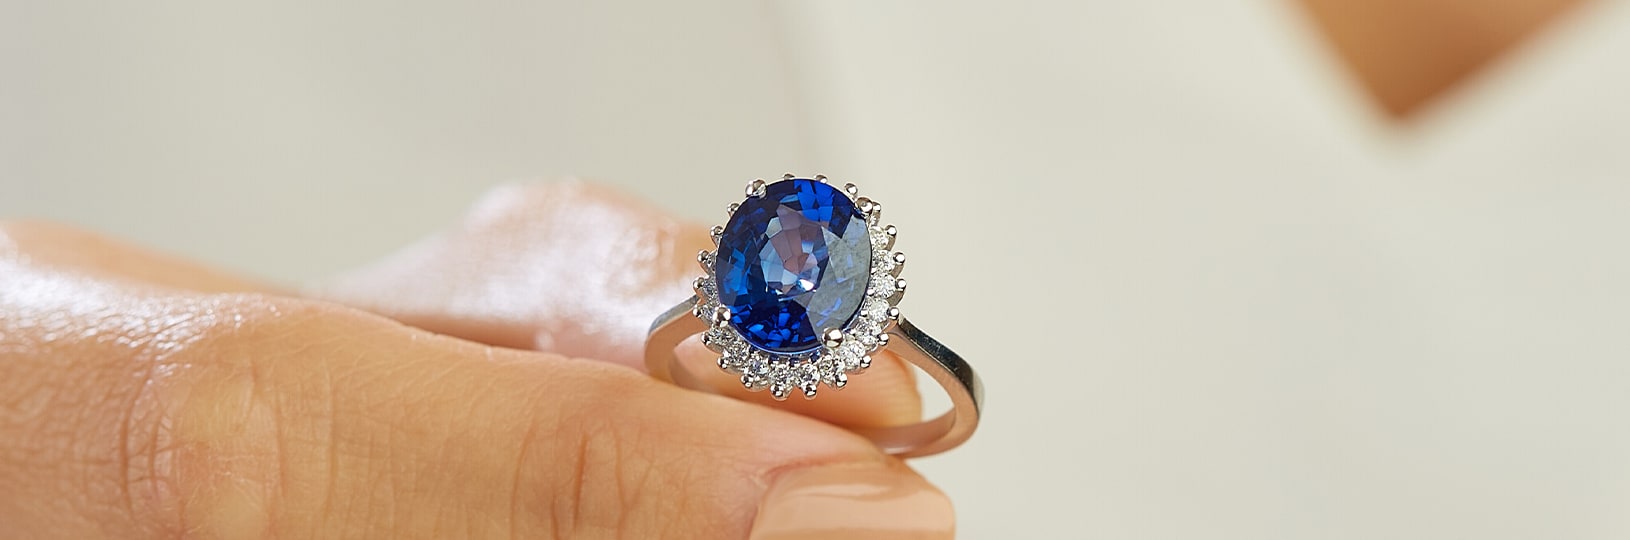 A halo sapphire engagement ring